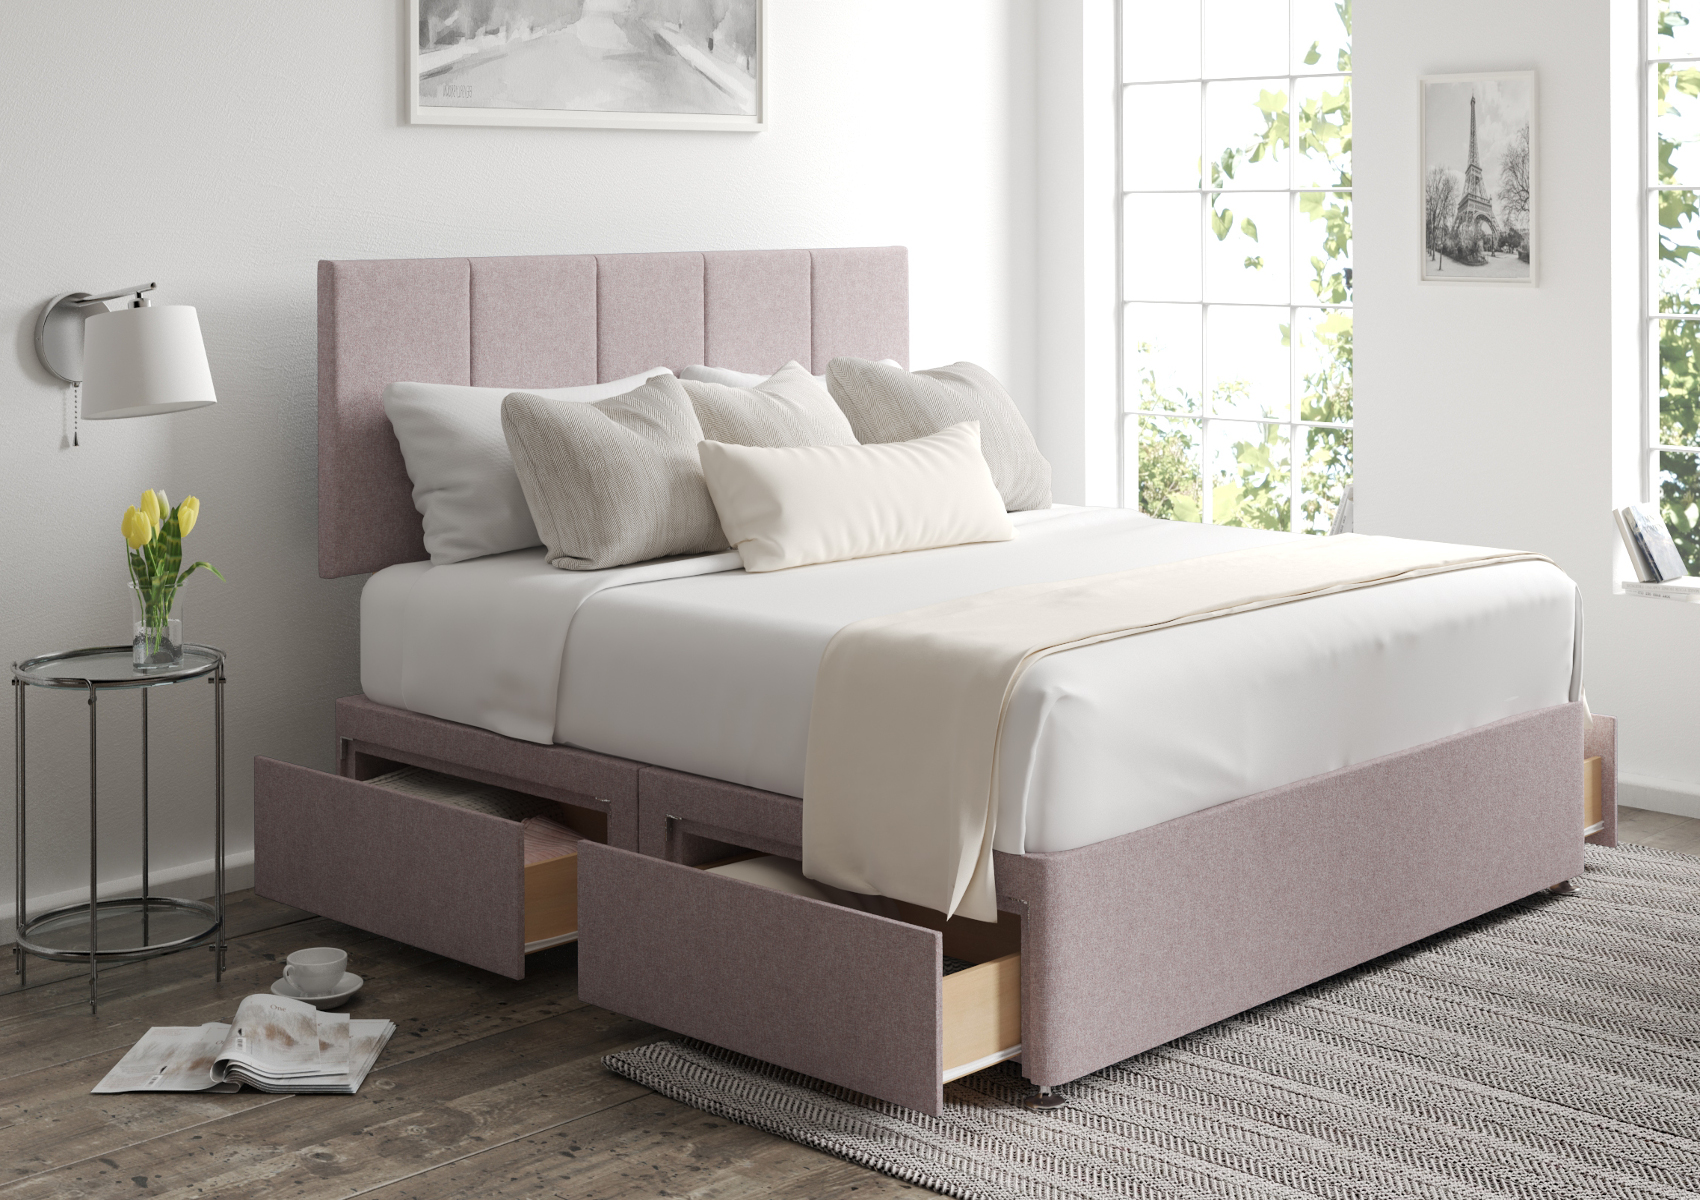 View Hannah Arran Natural Upholstered Double Bed Time4Sleep information